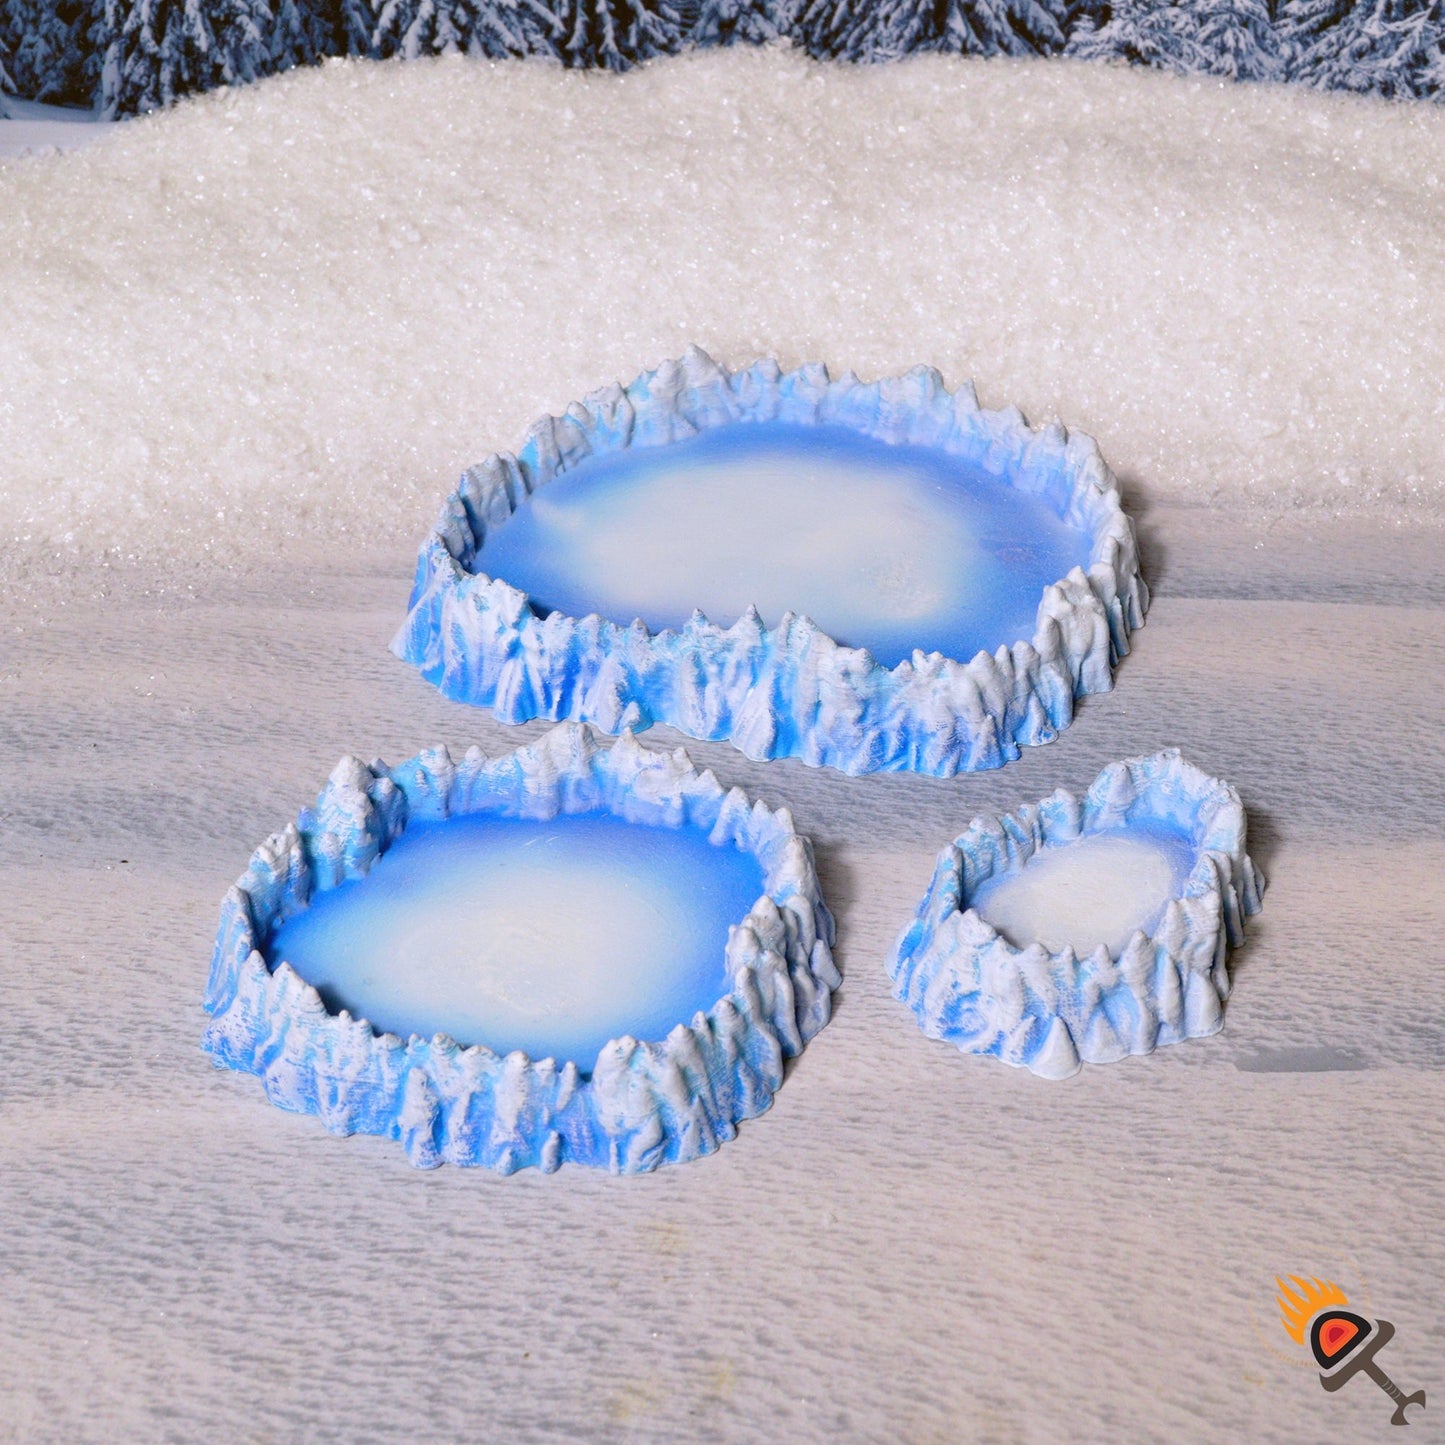 Icy Pits 15mm 28mm for D&D Terrain, DnD Pathfinder Frozen Ponds, Frostgrave, Icewind Dale